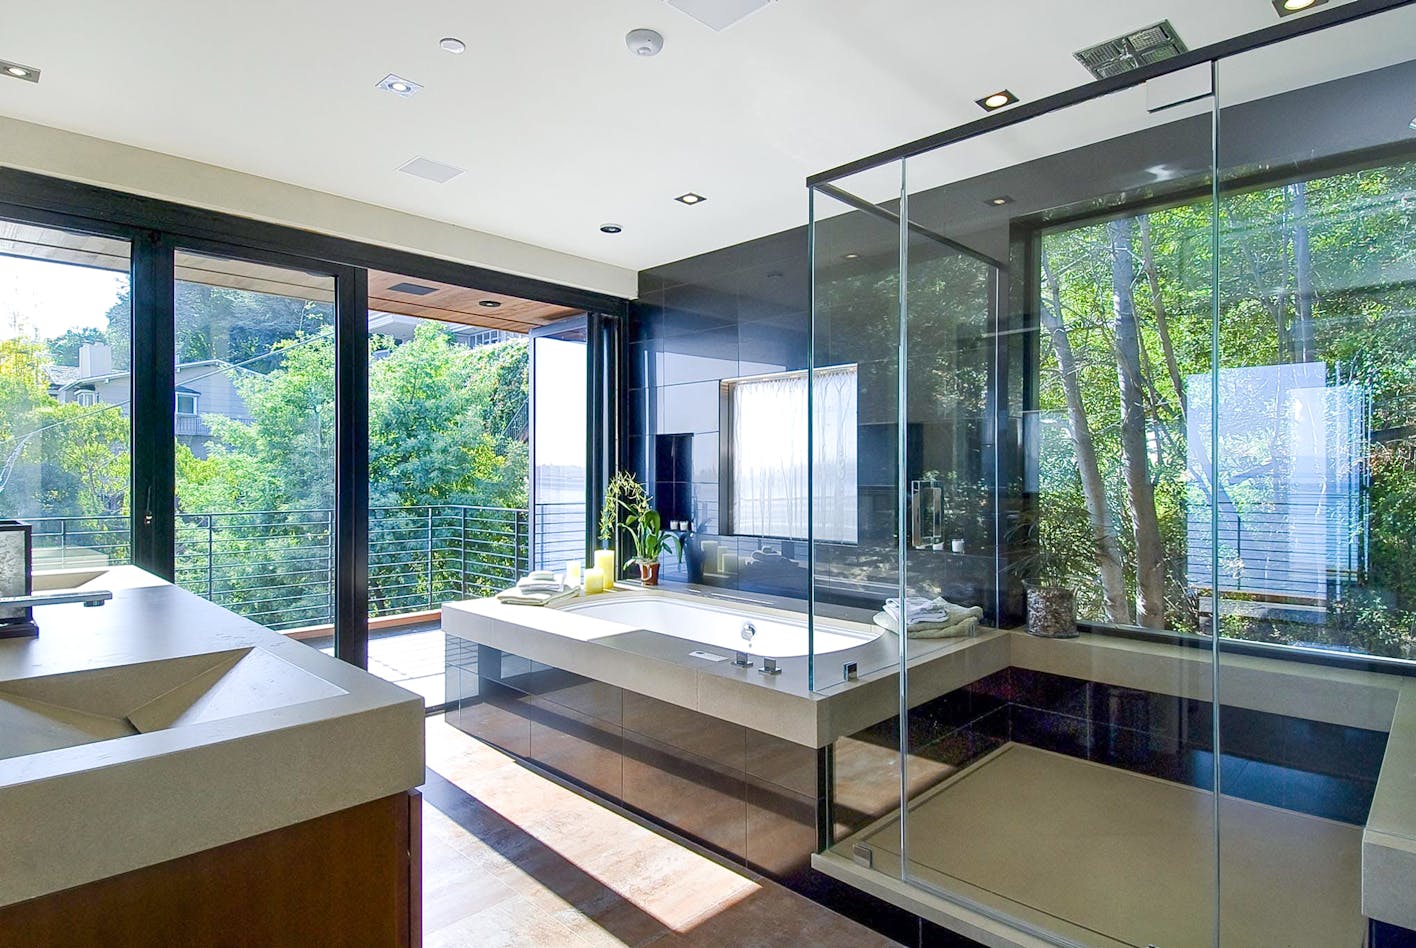 accordion style glass doors in residential bath design